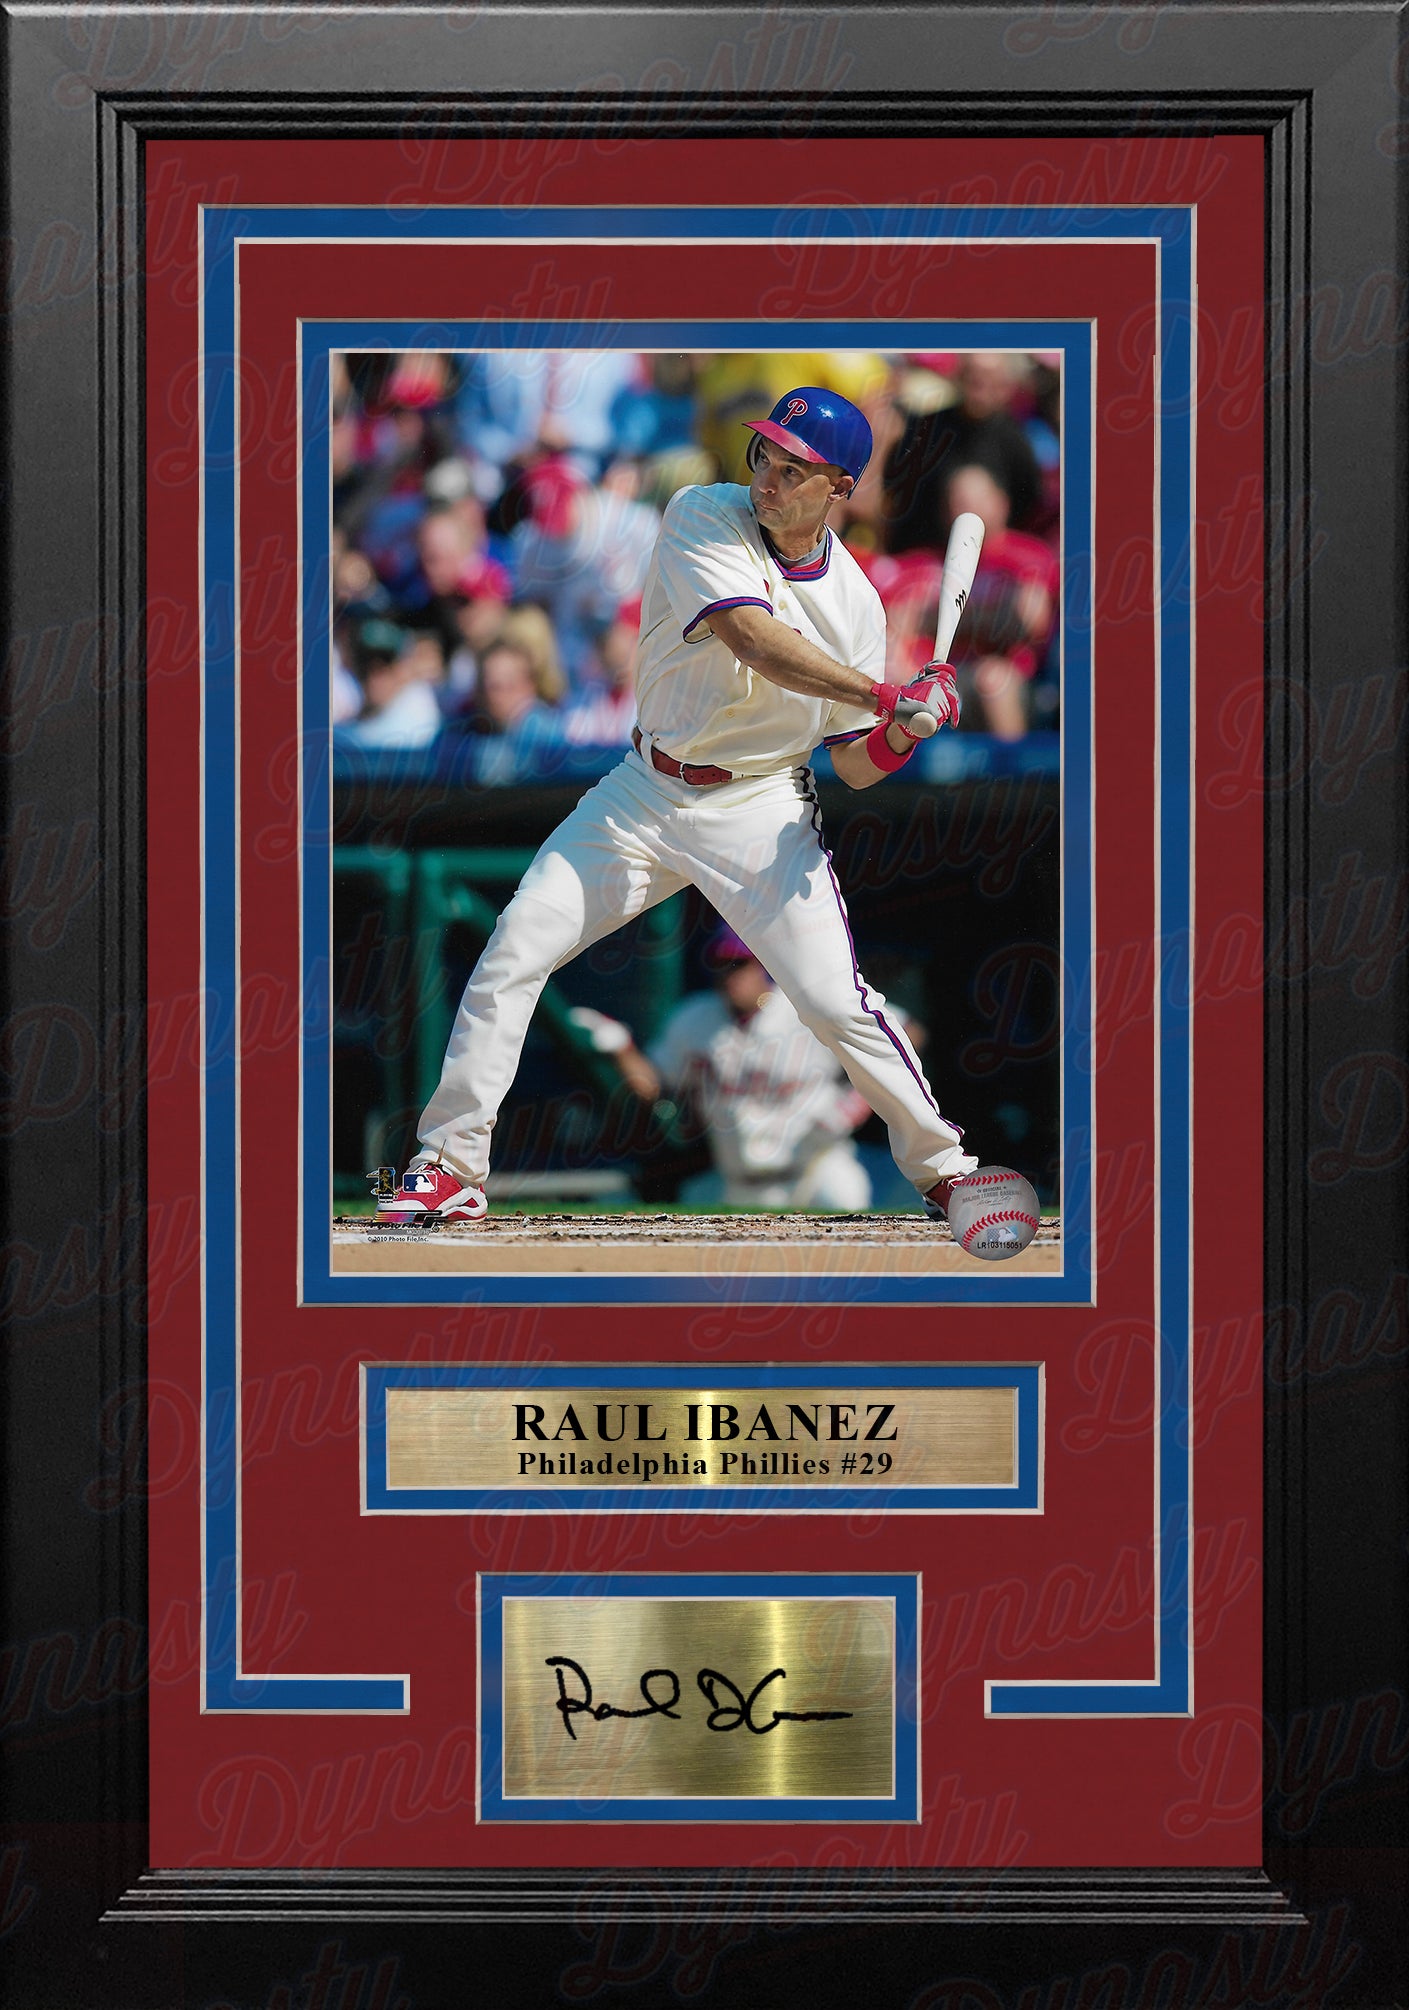 Raul Ibanez in Action Philadelphia Phillies 8" x 10" Framed Baseball Photo with Engraved Autograph - Dynasty Sports & Framing 